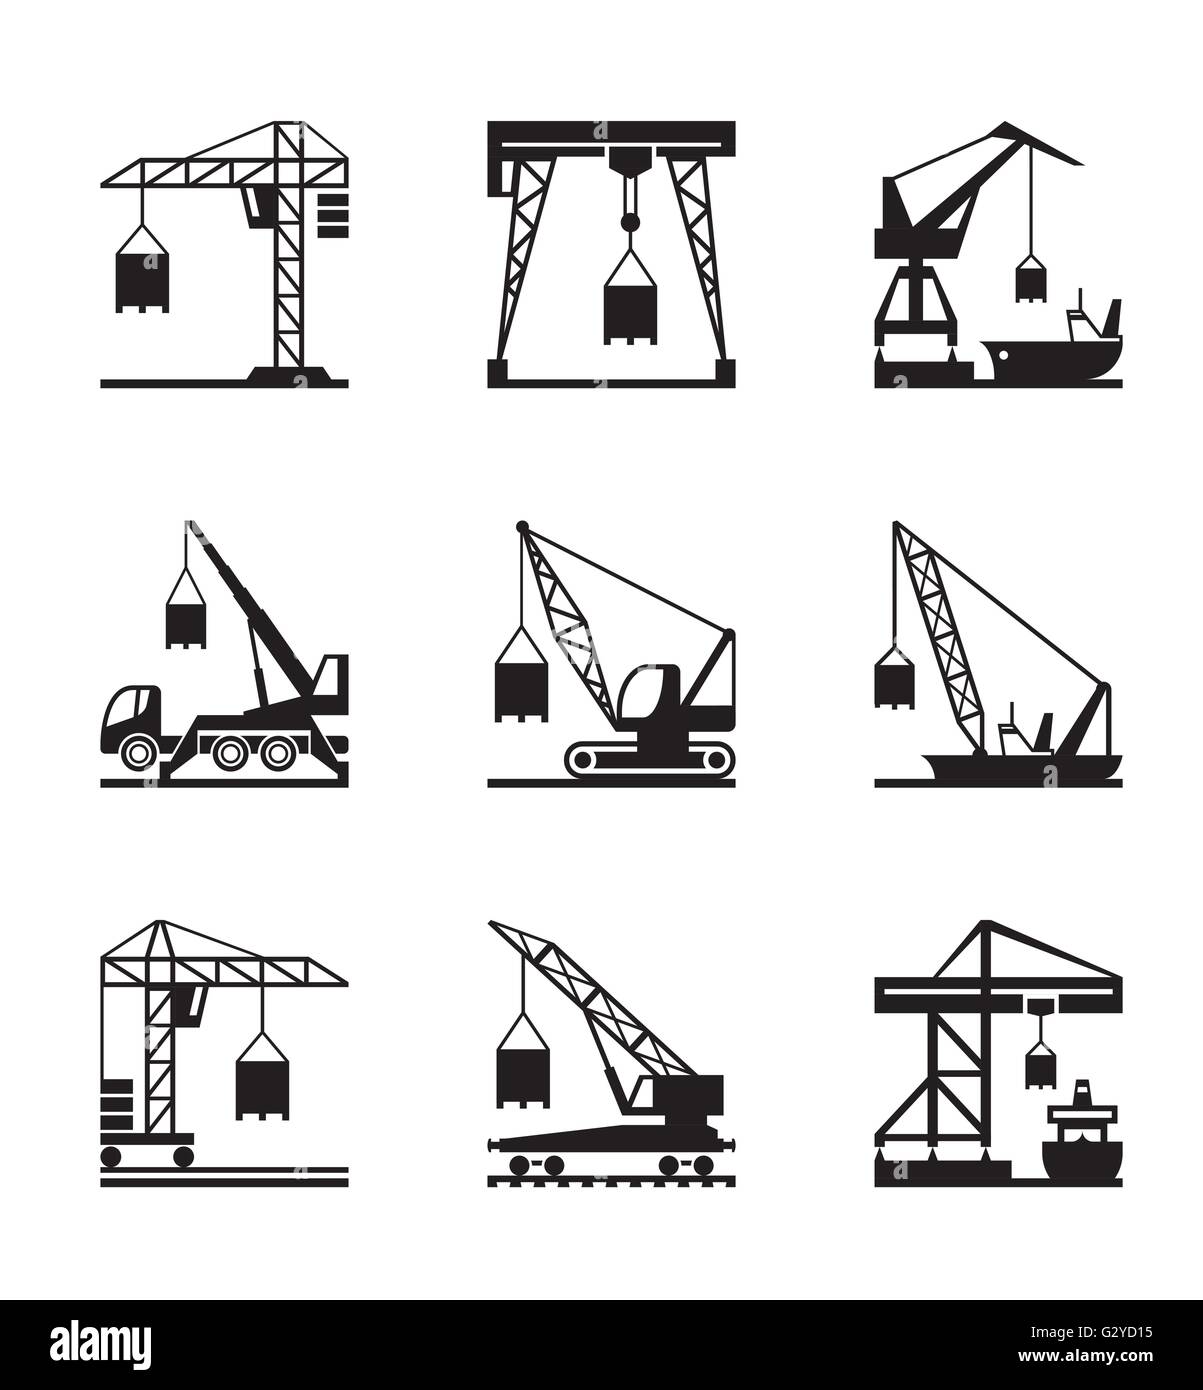 Various types of cranes - vector illustration Stock Vector